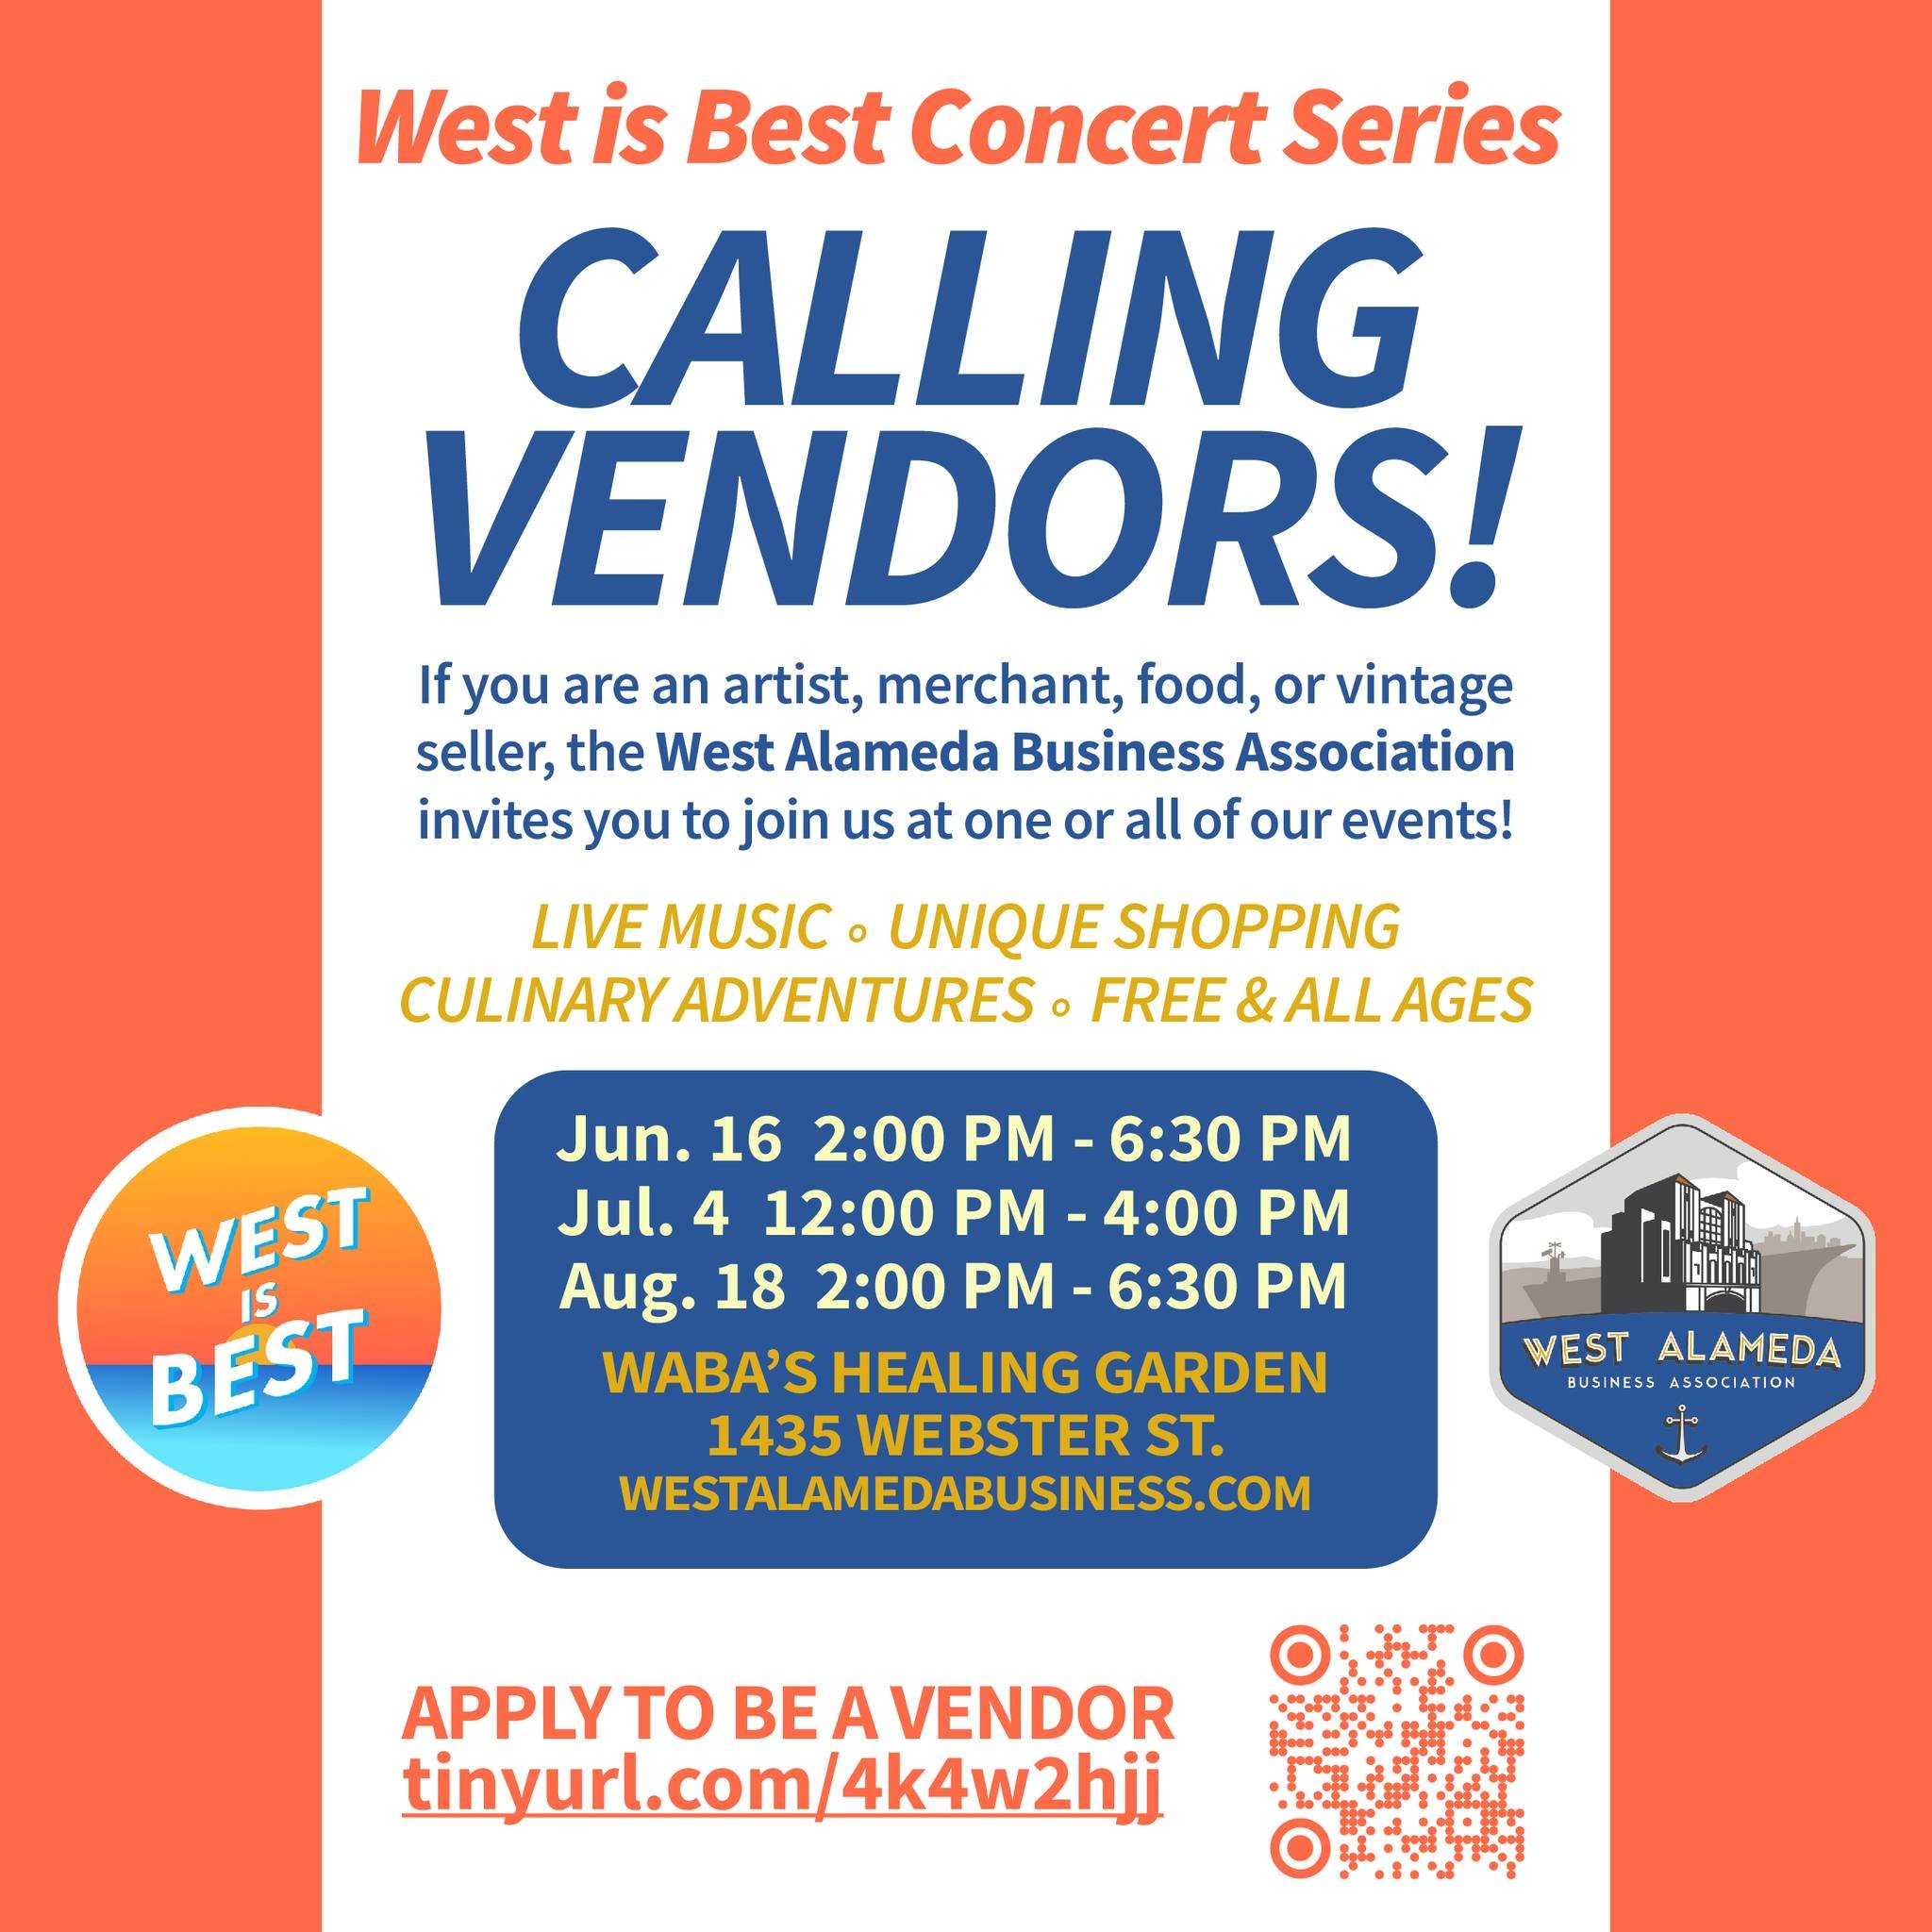 Are you an artist, maker, or vintage goods seller? Have a food or catering business? The West Alameda Business Association is looking for vendors for its free summer concert series, West Is Best! Taking place in The Healing Garden, you can reach thou